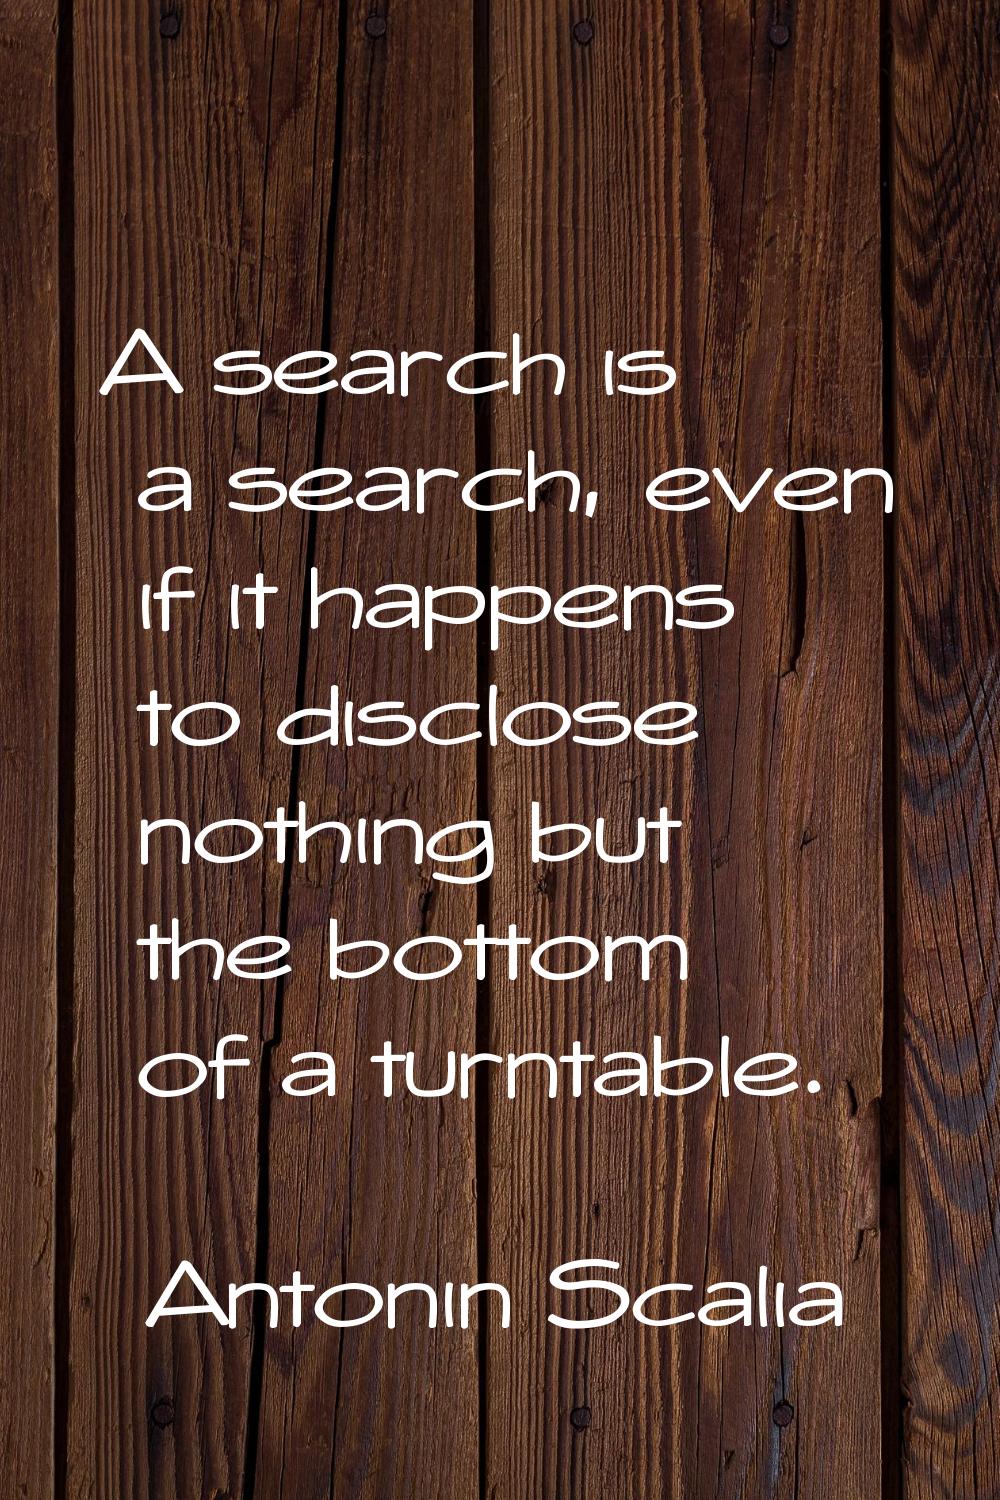 A search is a search, even if it happens to disclose nothing but the bottom of a turntable.